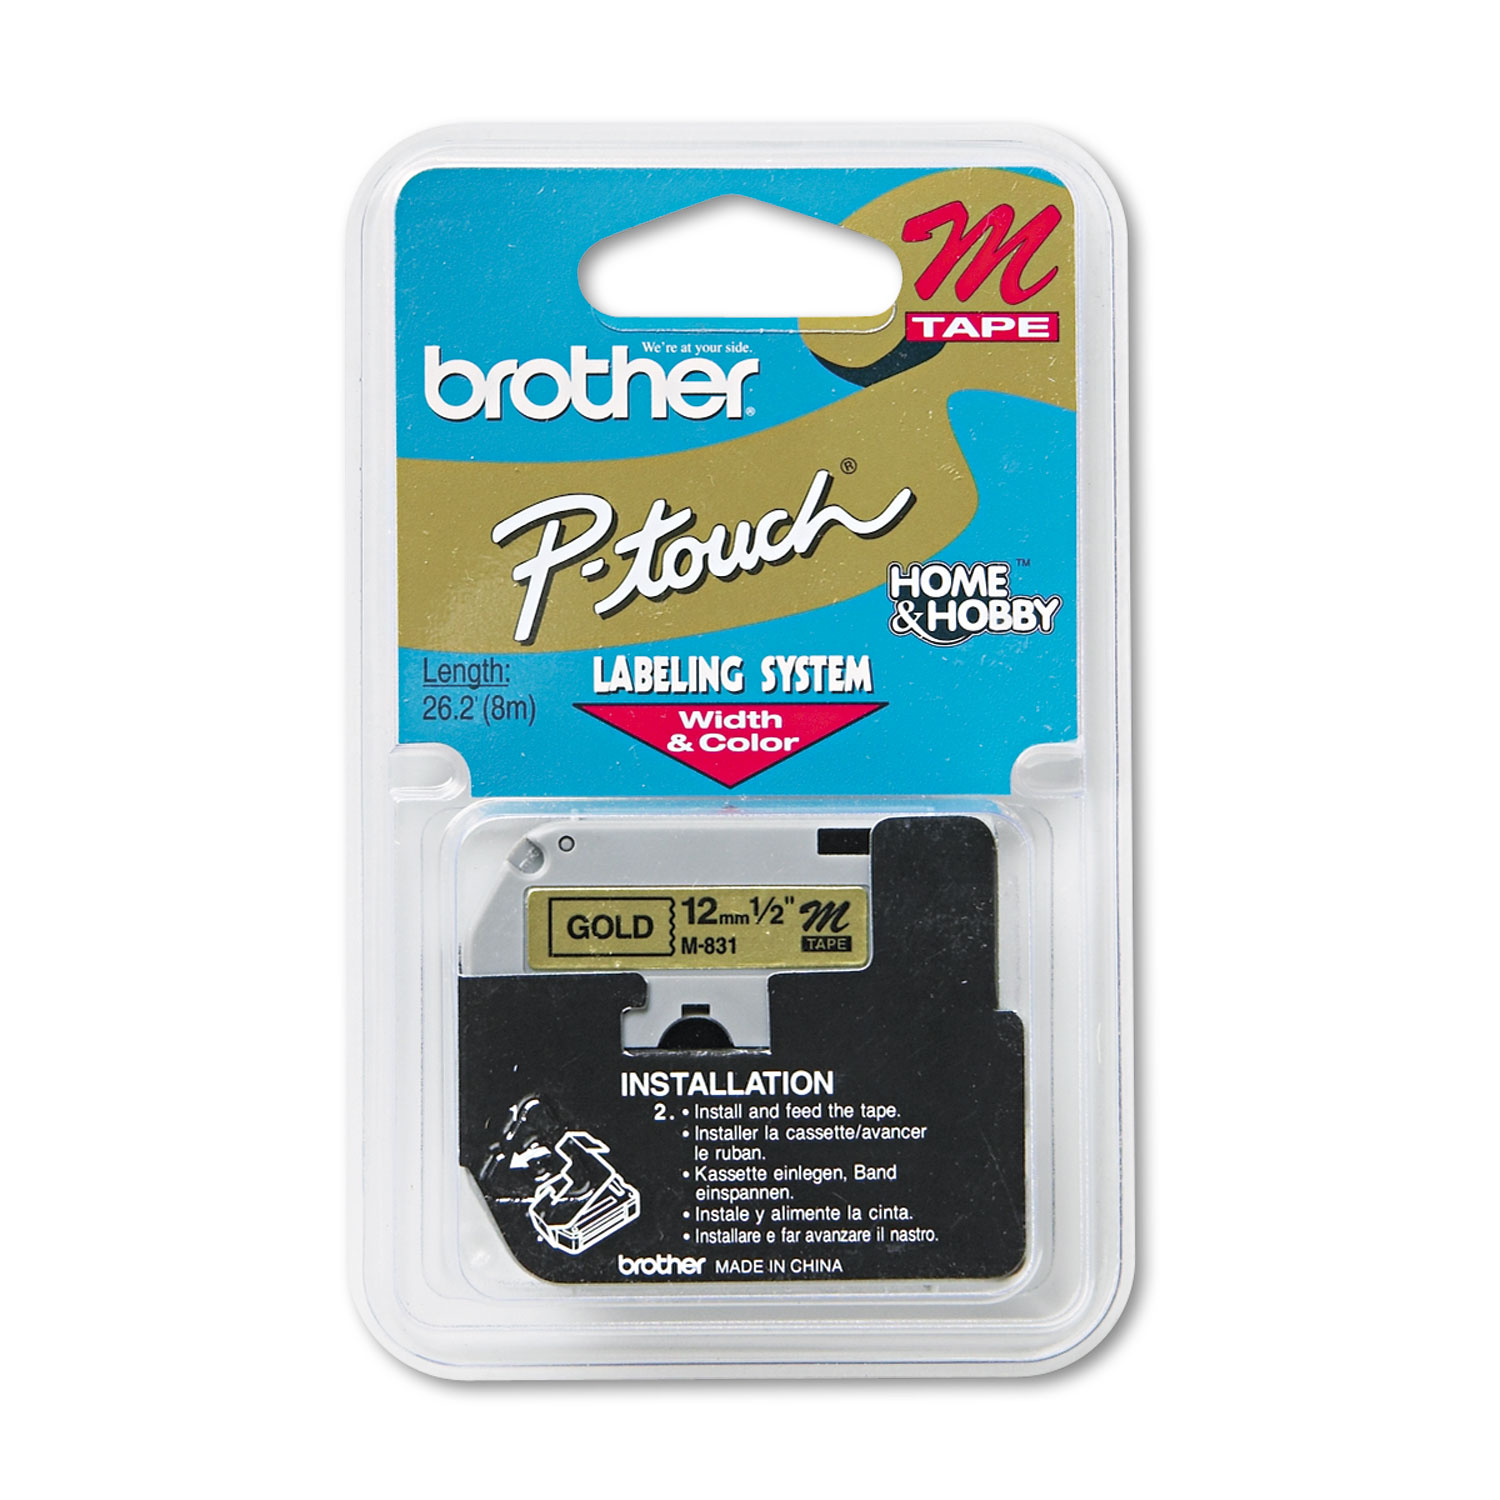  Brother P-Touch M831 M Series Tape Cartridge for P-Touch Labelers, 0.47 x 26.2 ft, Black on Gold (BRTM831) 